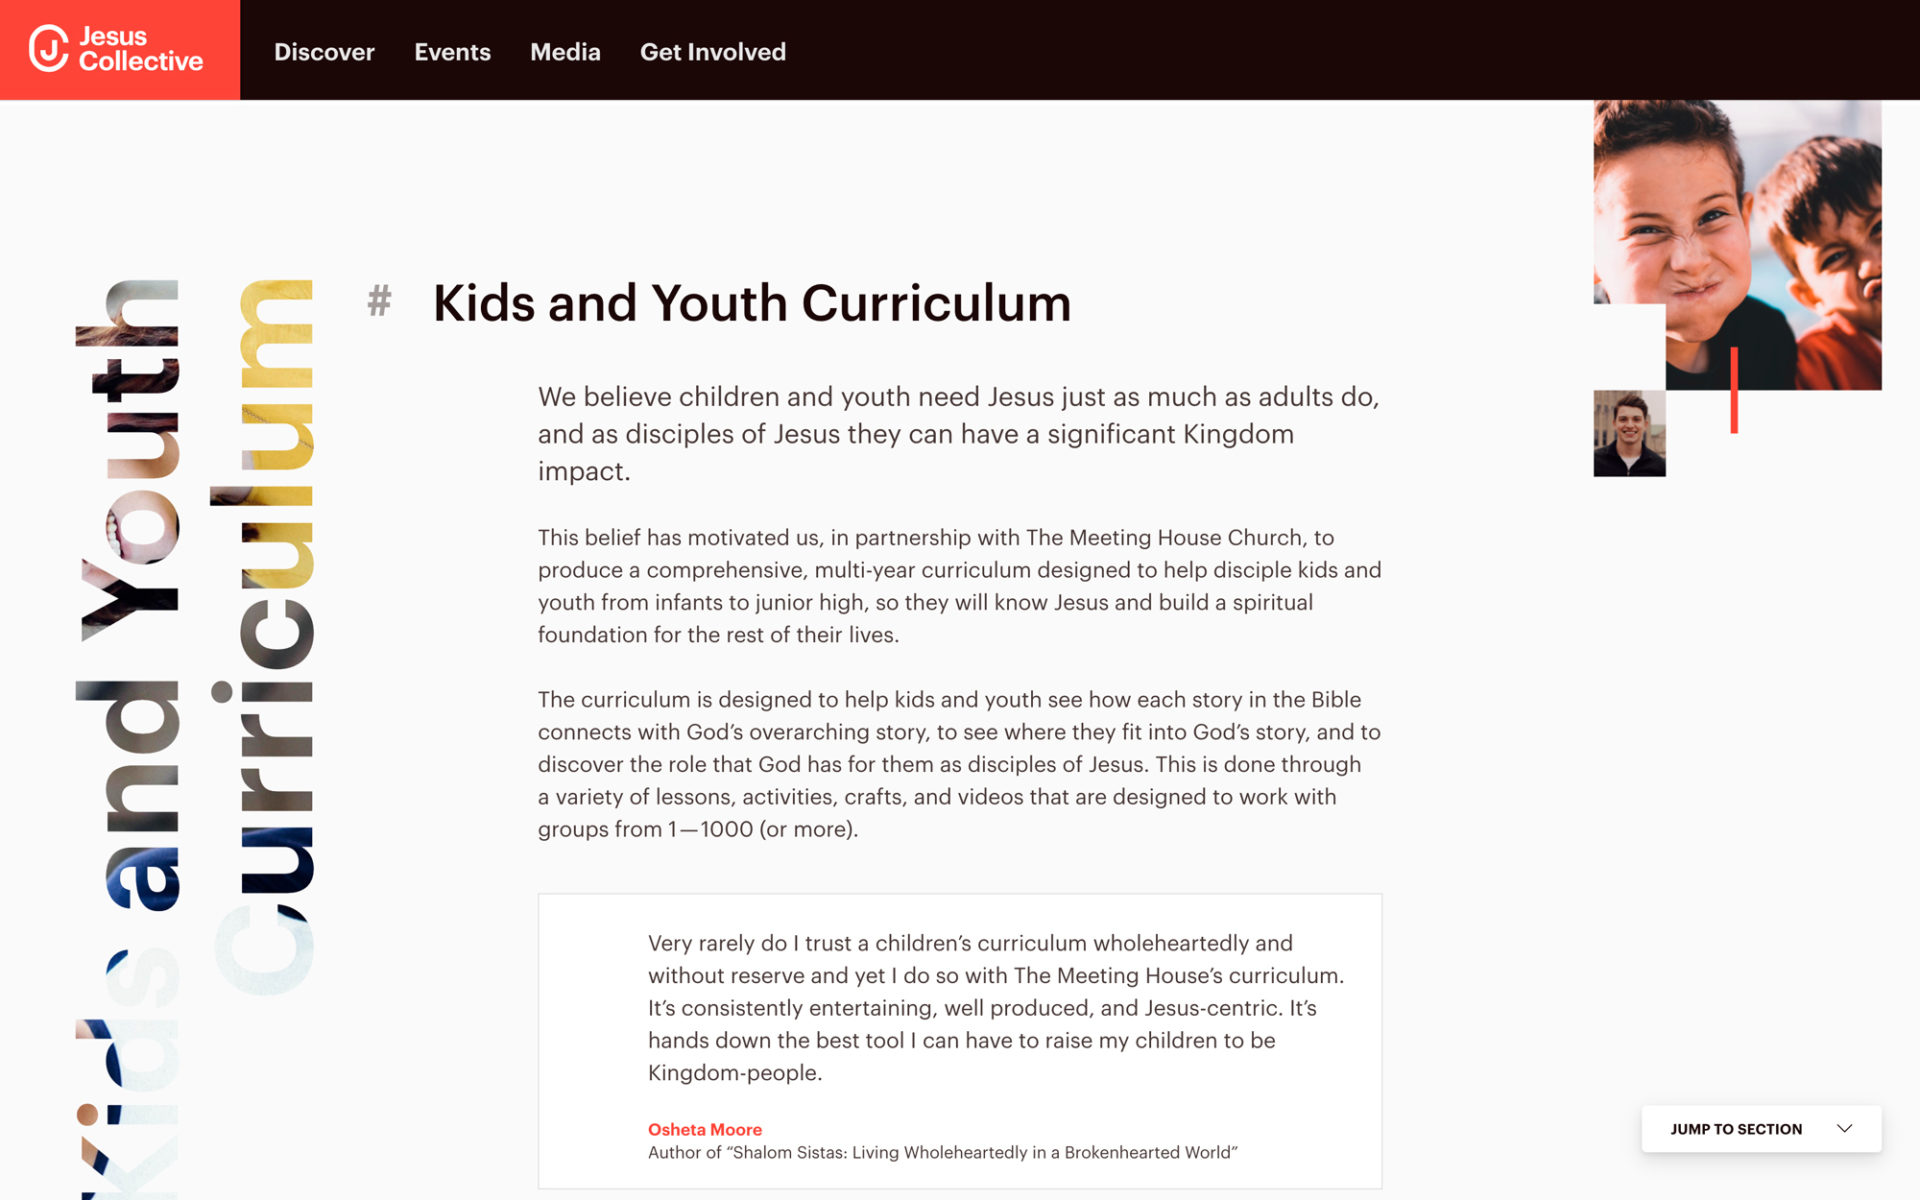 Section on the Jesus Collective website about Kids & Youth curriculum